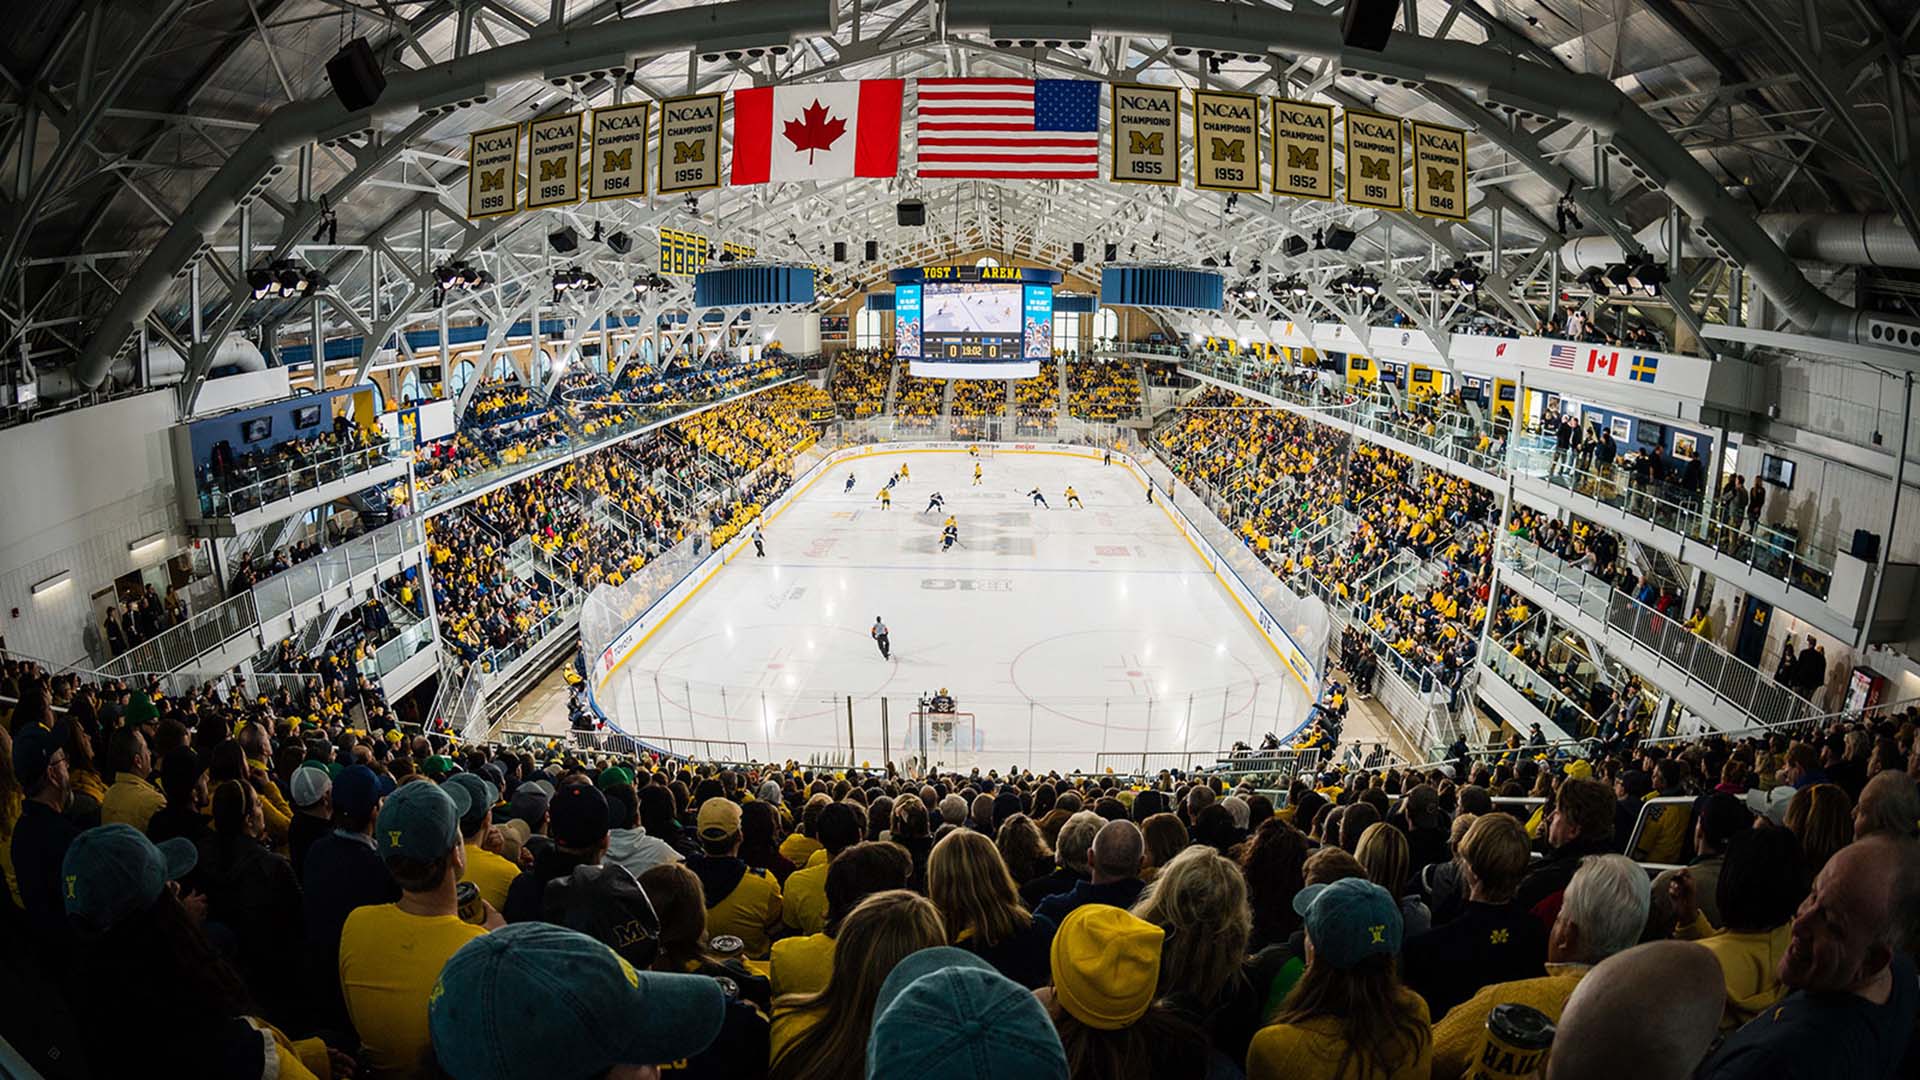 Alternate view of arena seating filled with fans at Yost Ice Arena.